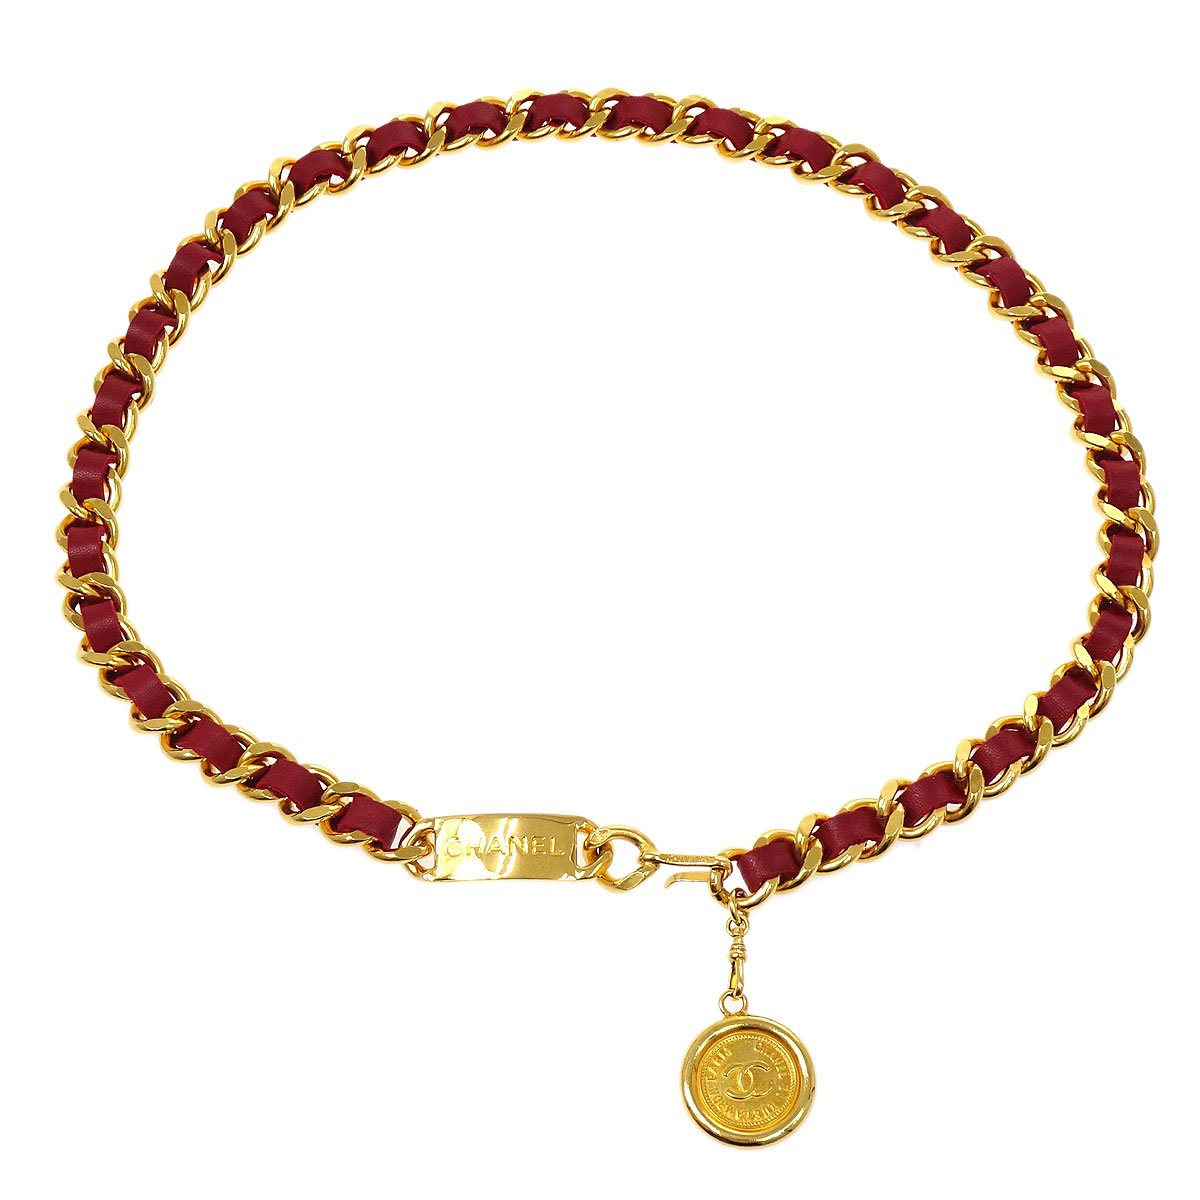 Chanel Medallion Charm Gold Chain Belt Red Small Good 71643